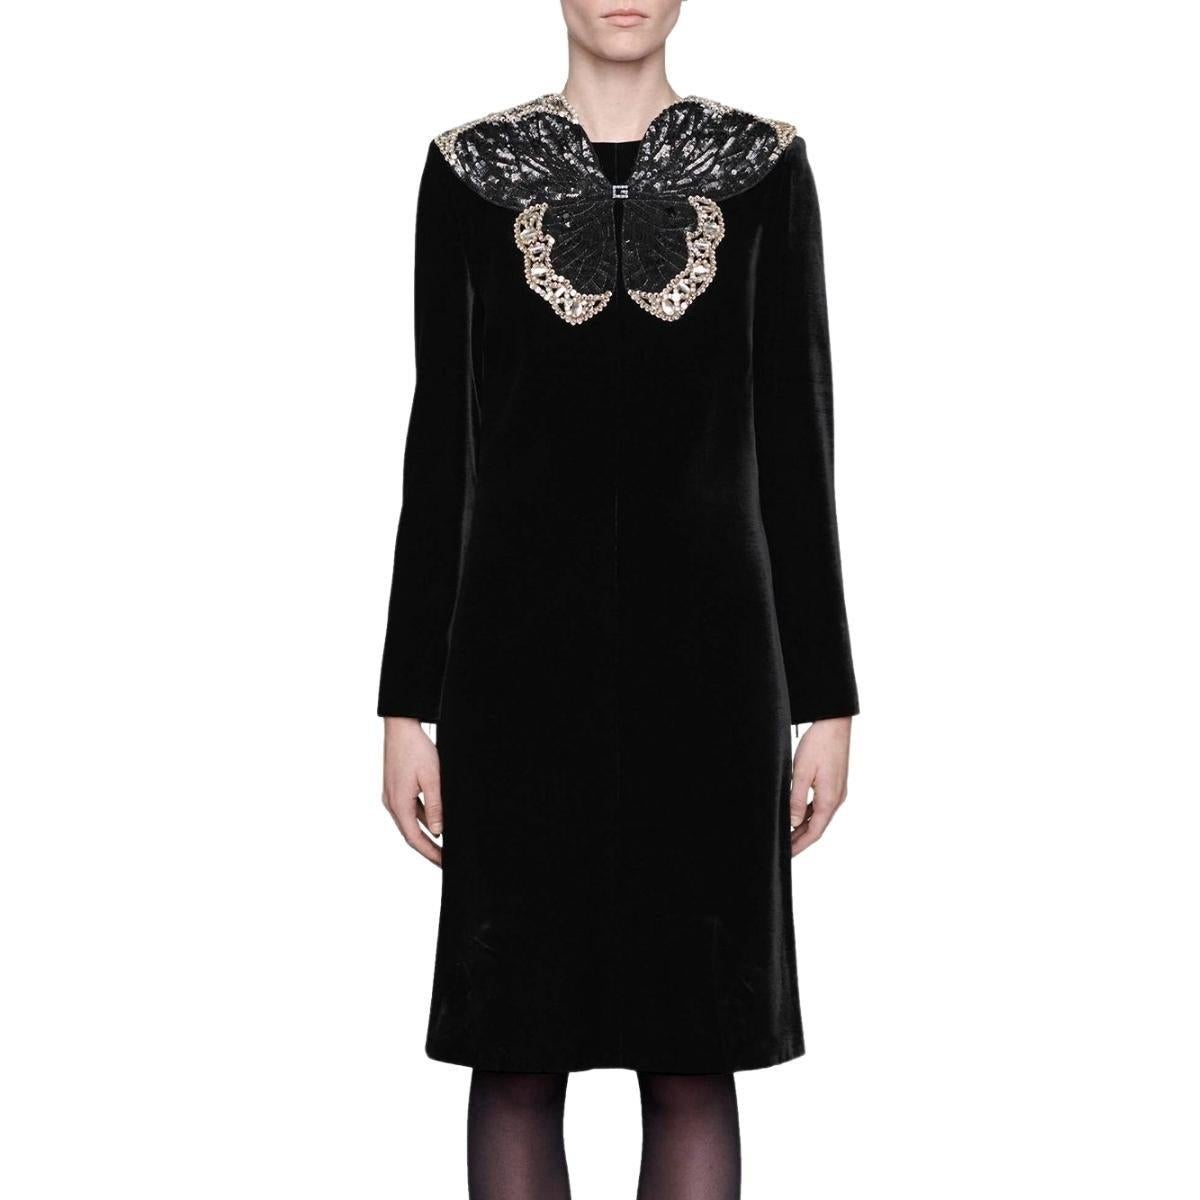 Butterfly appliqué to the front
Round neck
Long sleeves
Back zip fastening
Straight hem
Composition: Viscose 100%
Lining: Silk 100%
Crystal 100%
Brand style ID: 619106ZAE79
Made in Italy